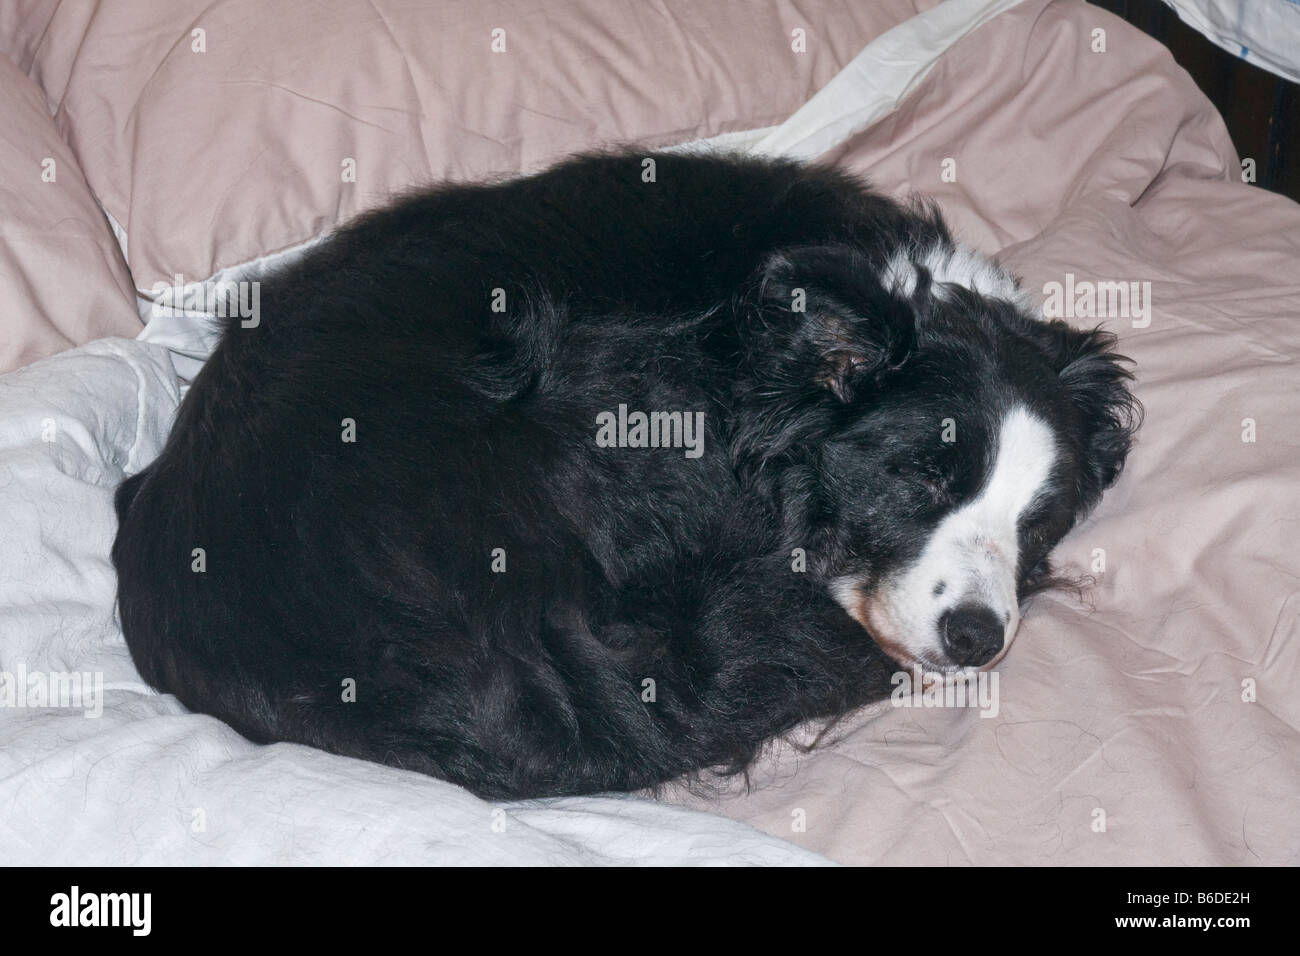 Border collie asleep on a bed Stock Photo